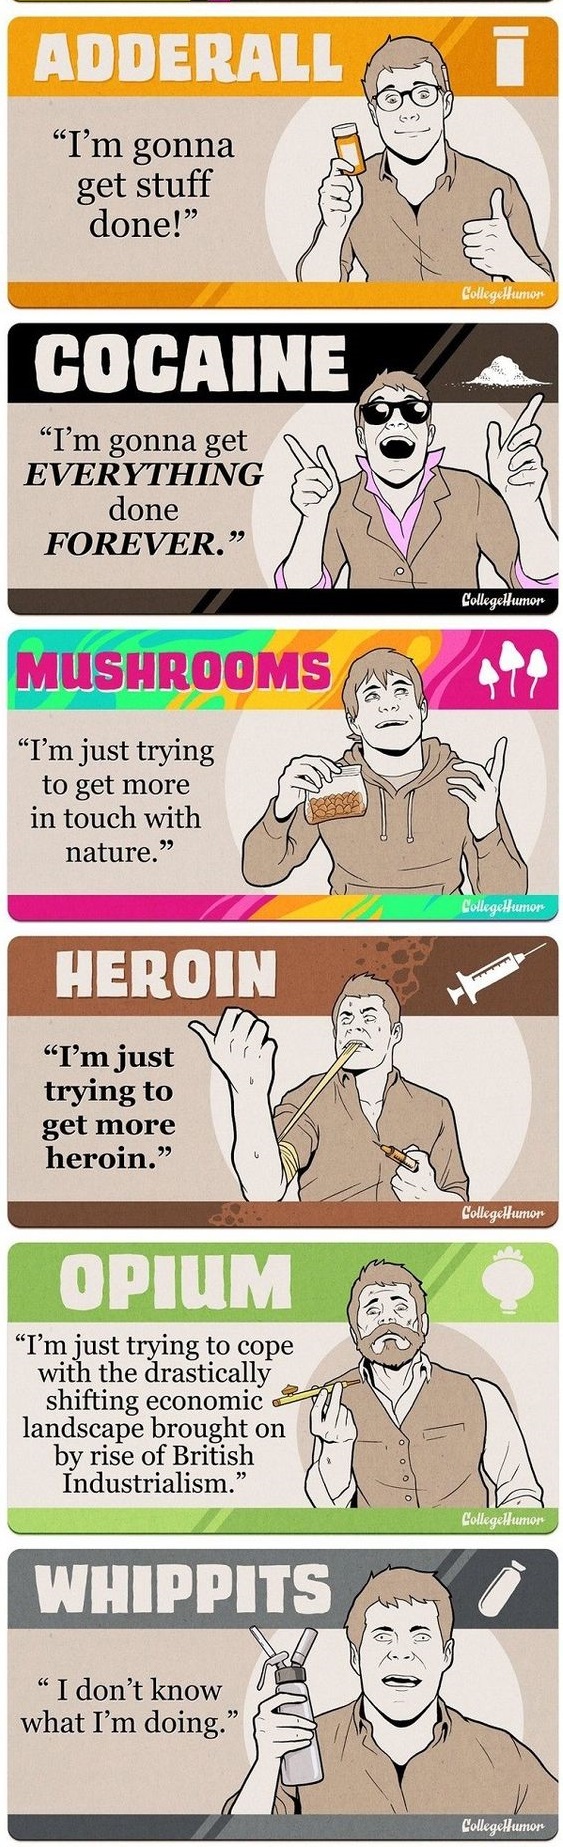 if drugs could talk 2 via daily fail center